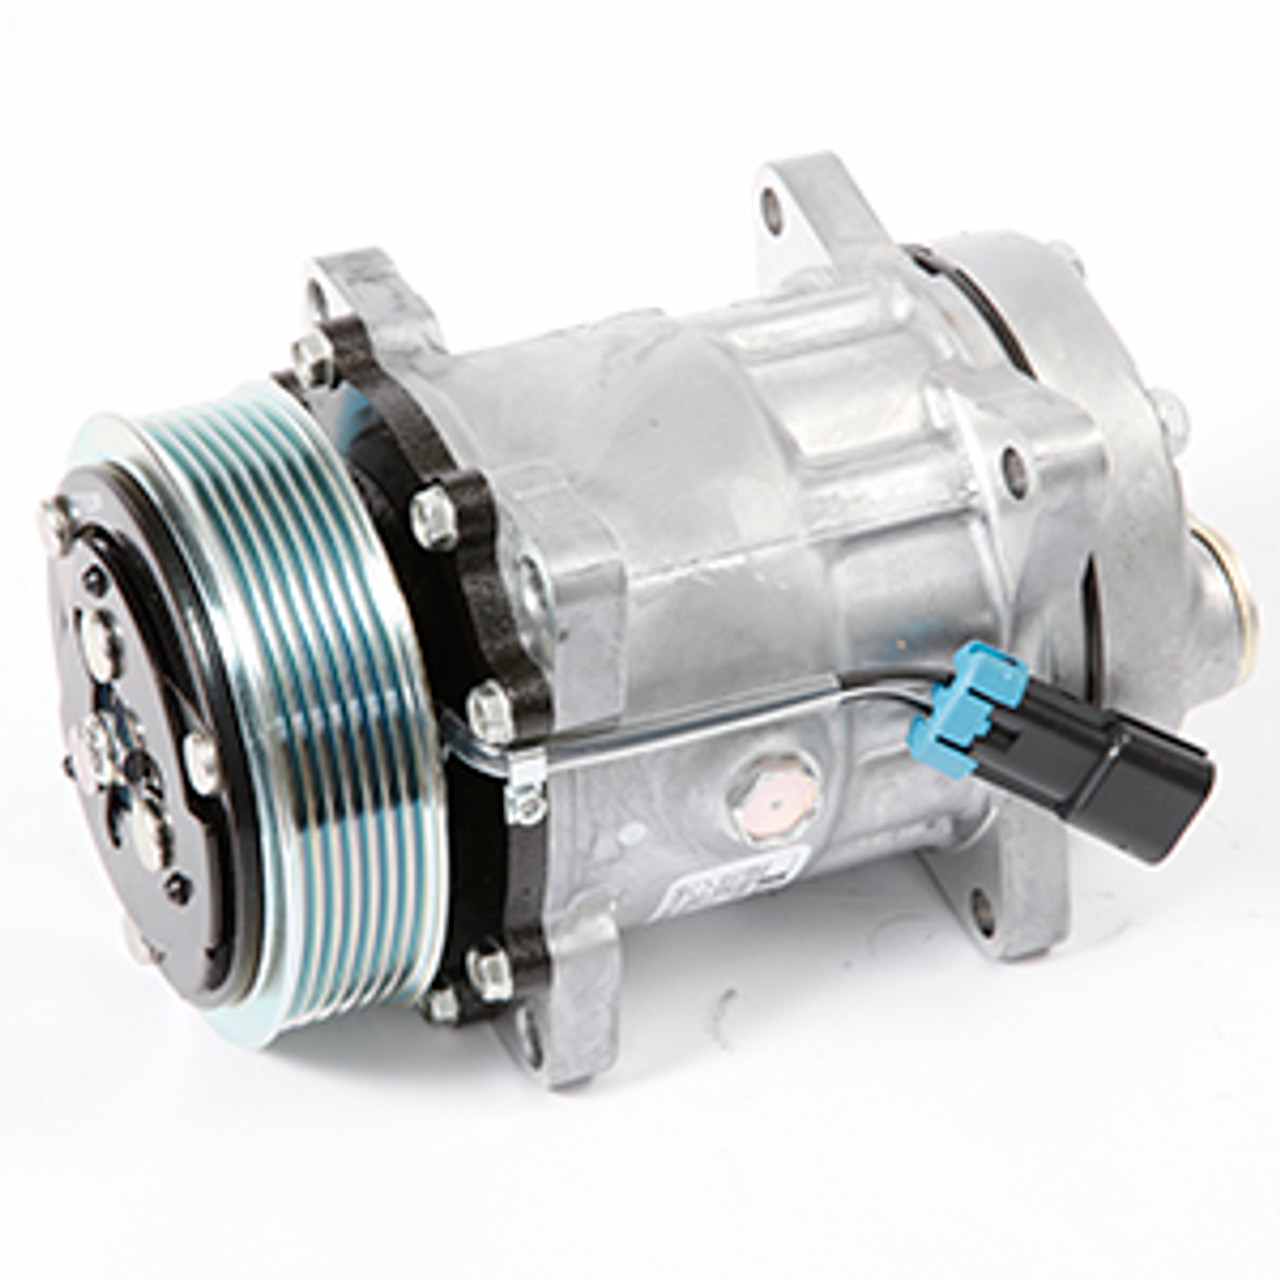 Sanden OEM SD7H15 Compressor 12V R-134a with SJA Head Type and PV7 Clutch  Type - 1401347 by Kysor